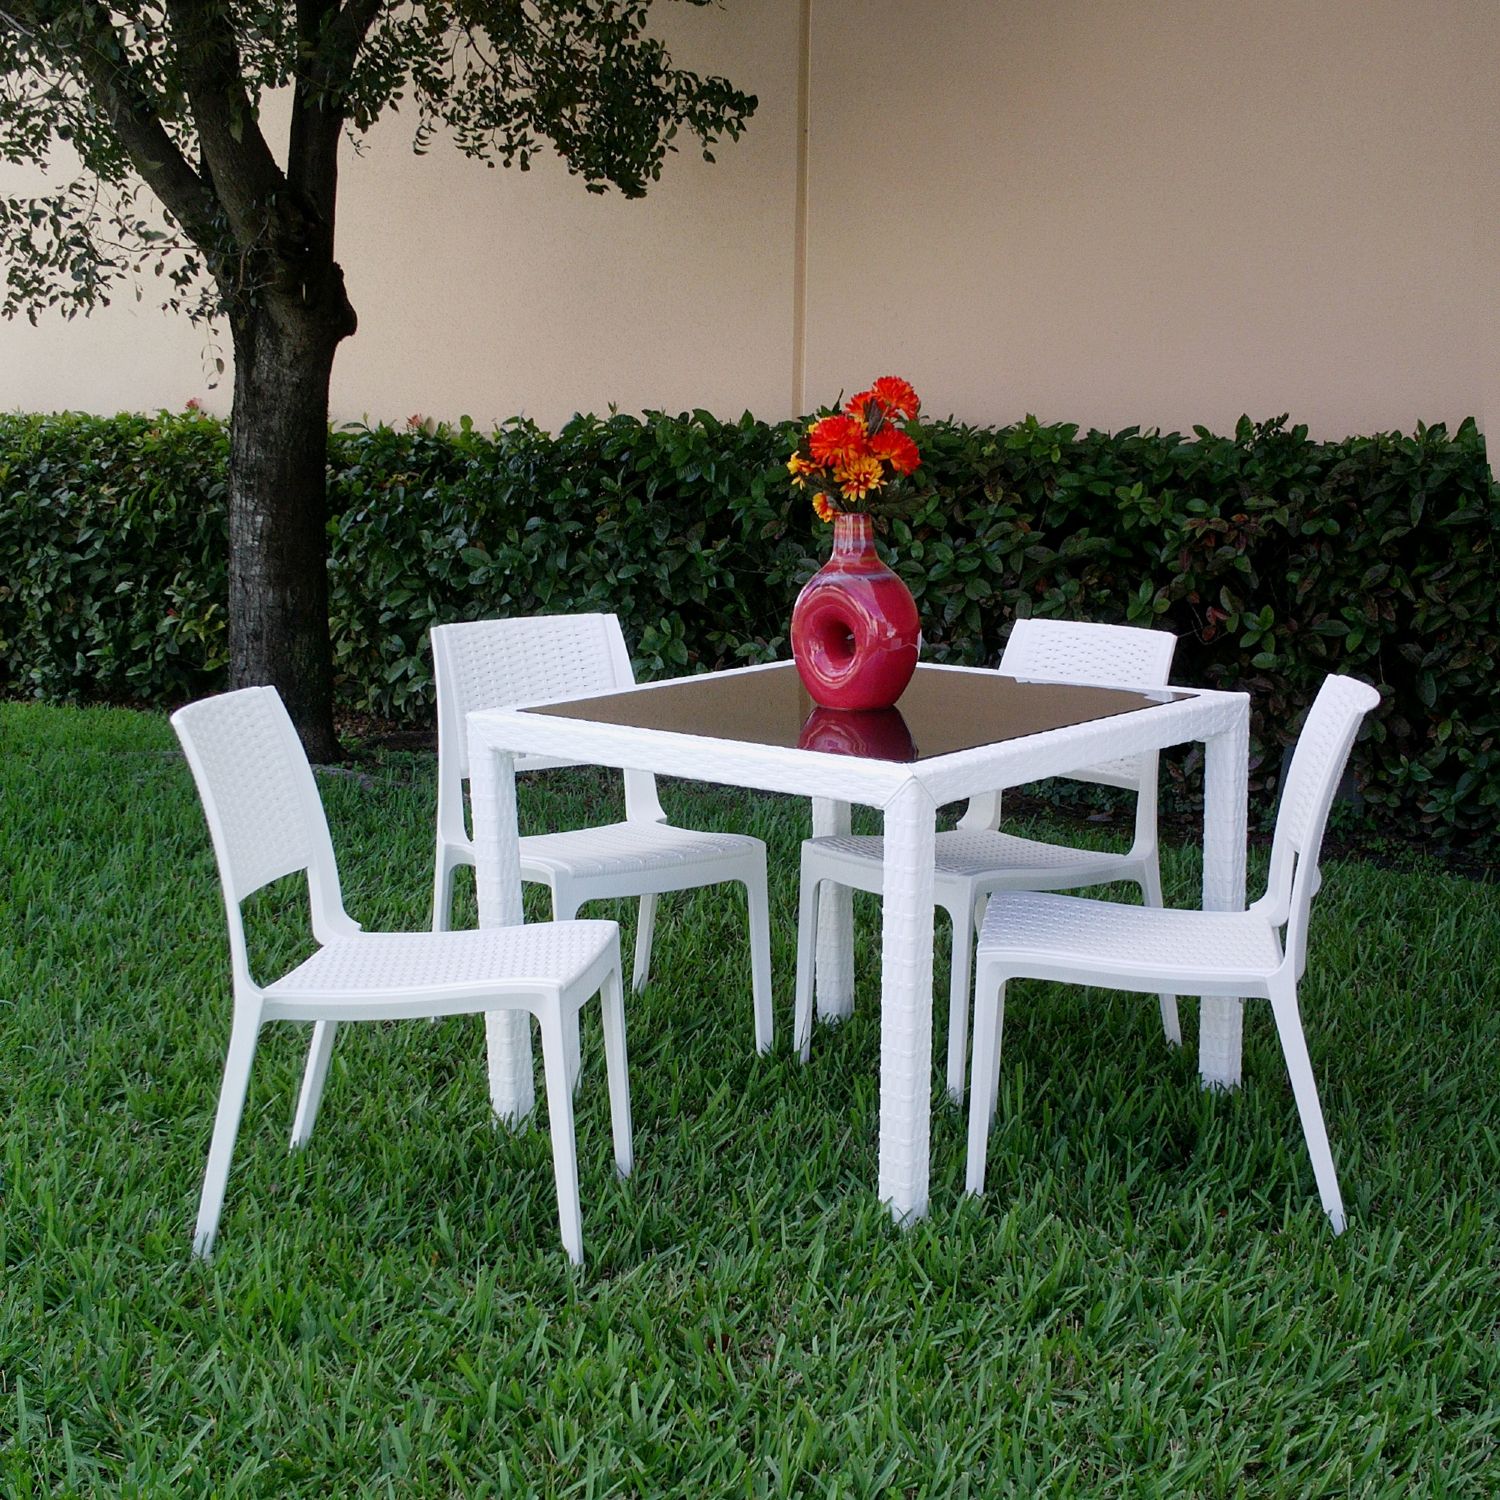 Miami Wickerlook Resin Patio Dining Set 5 Piece Rattan Gray with Side Chairs ISP992S-DG - 3